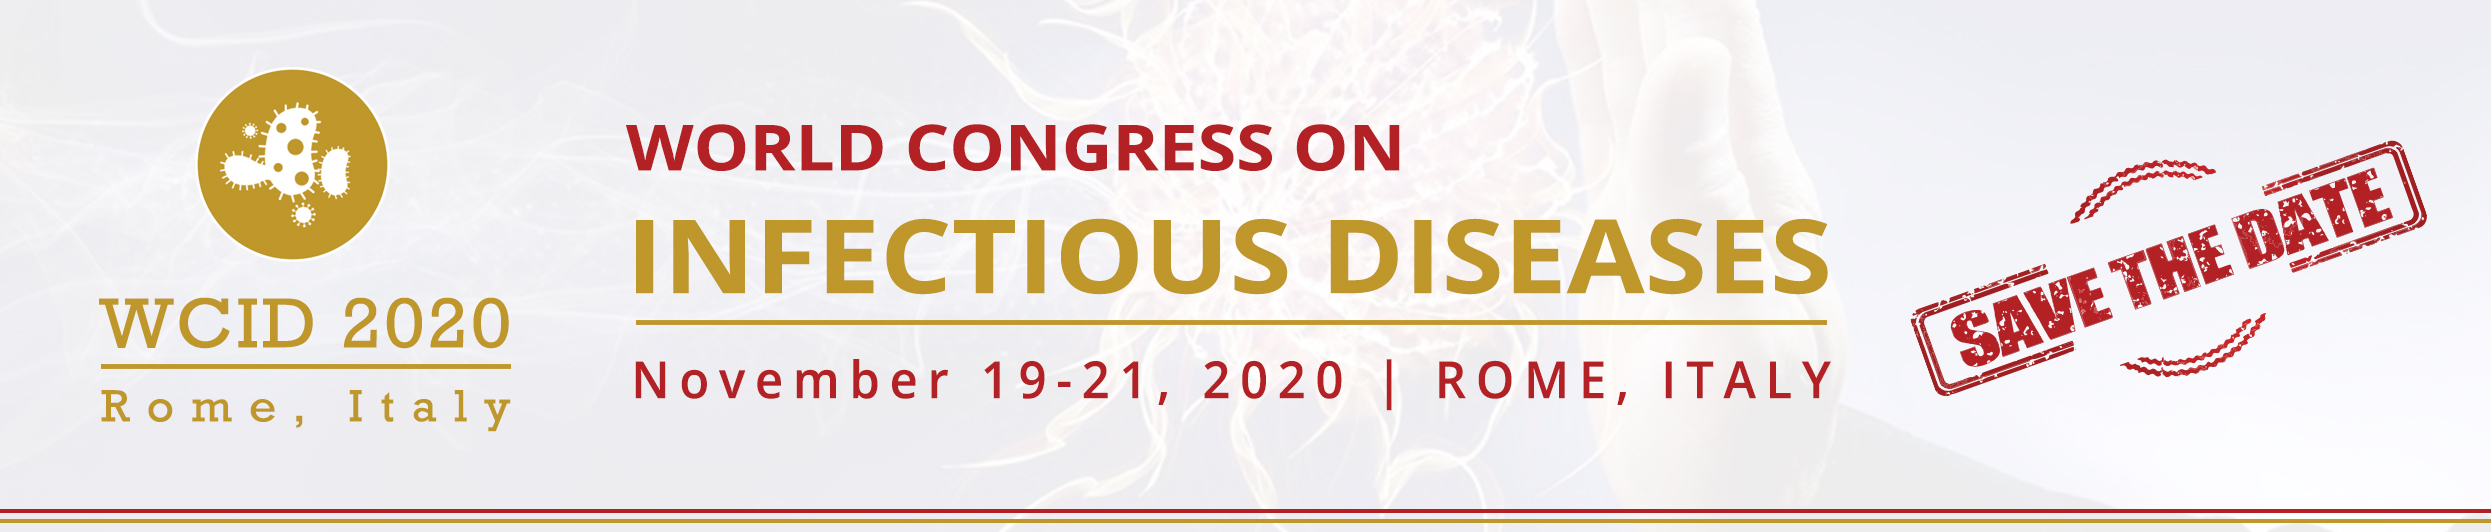 World Congress on Infectious Diseases, Italy